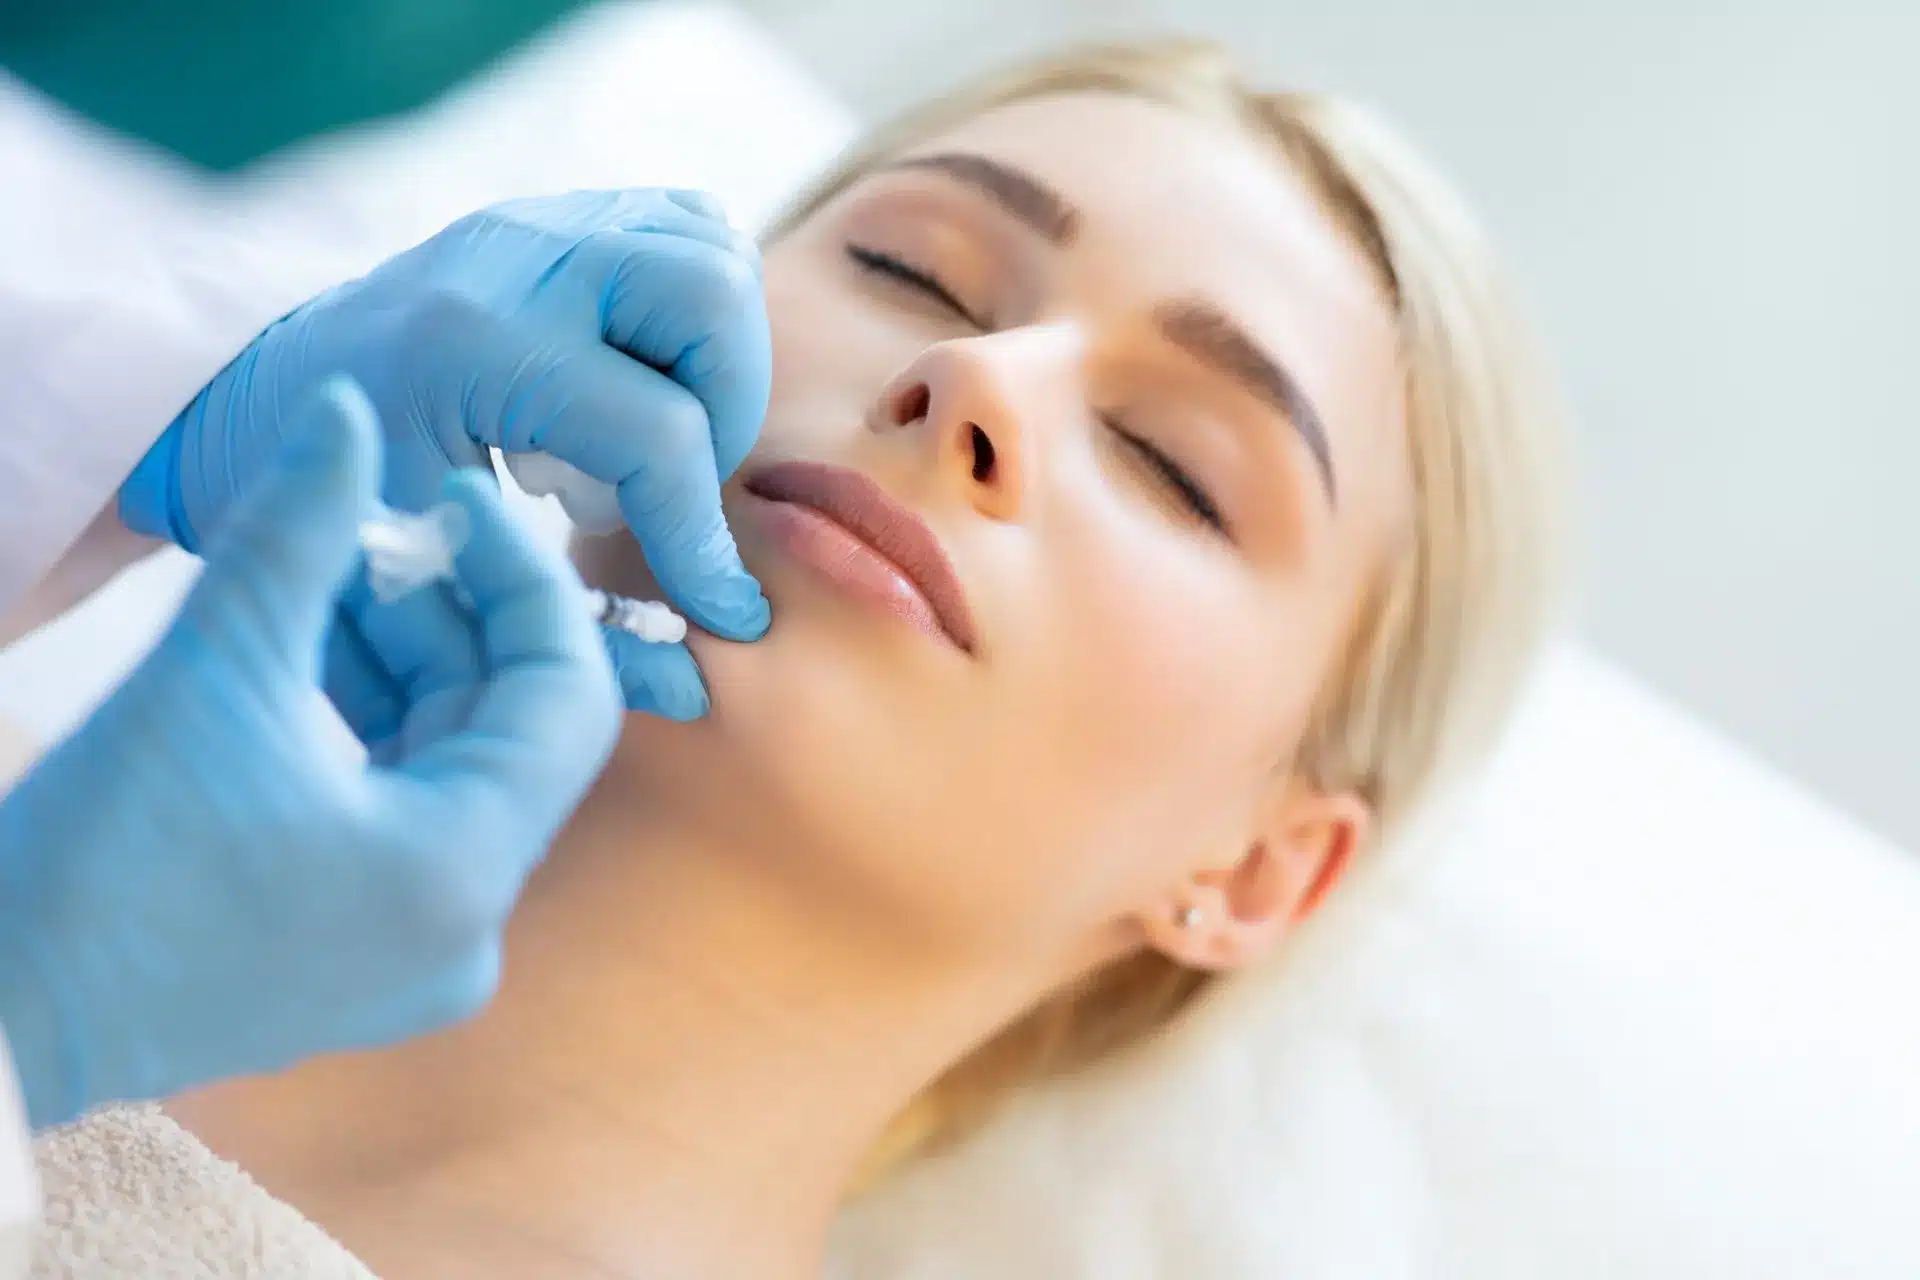 Women getting Botox injection Photo | AgeLess Medical Aesthetics in Cheyenne, WY